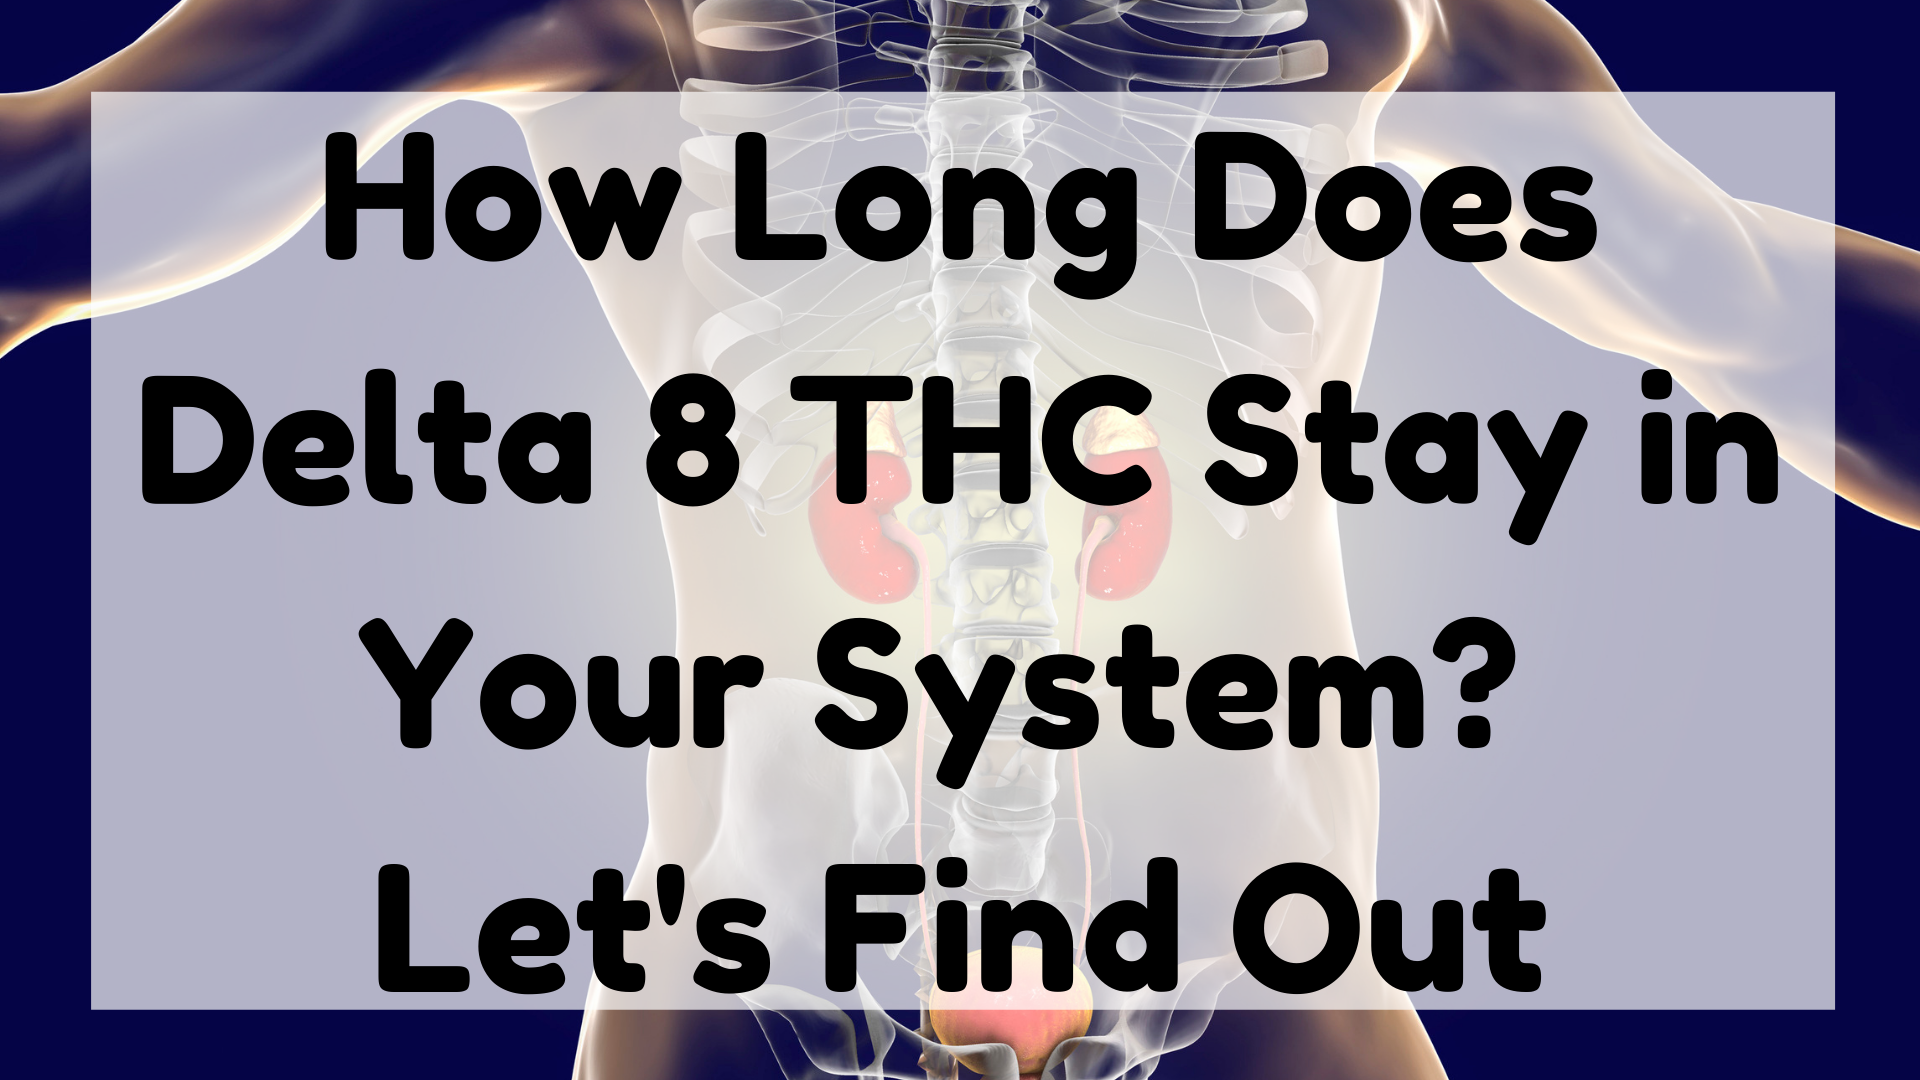 How Long Does Delta 8 THC Stay in Your System